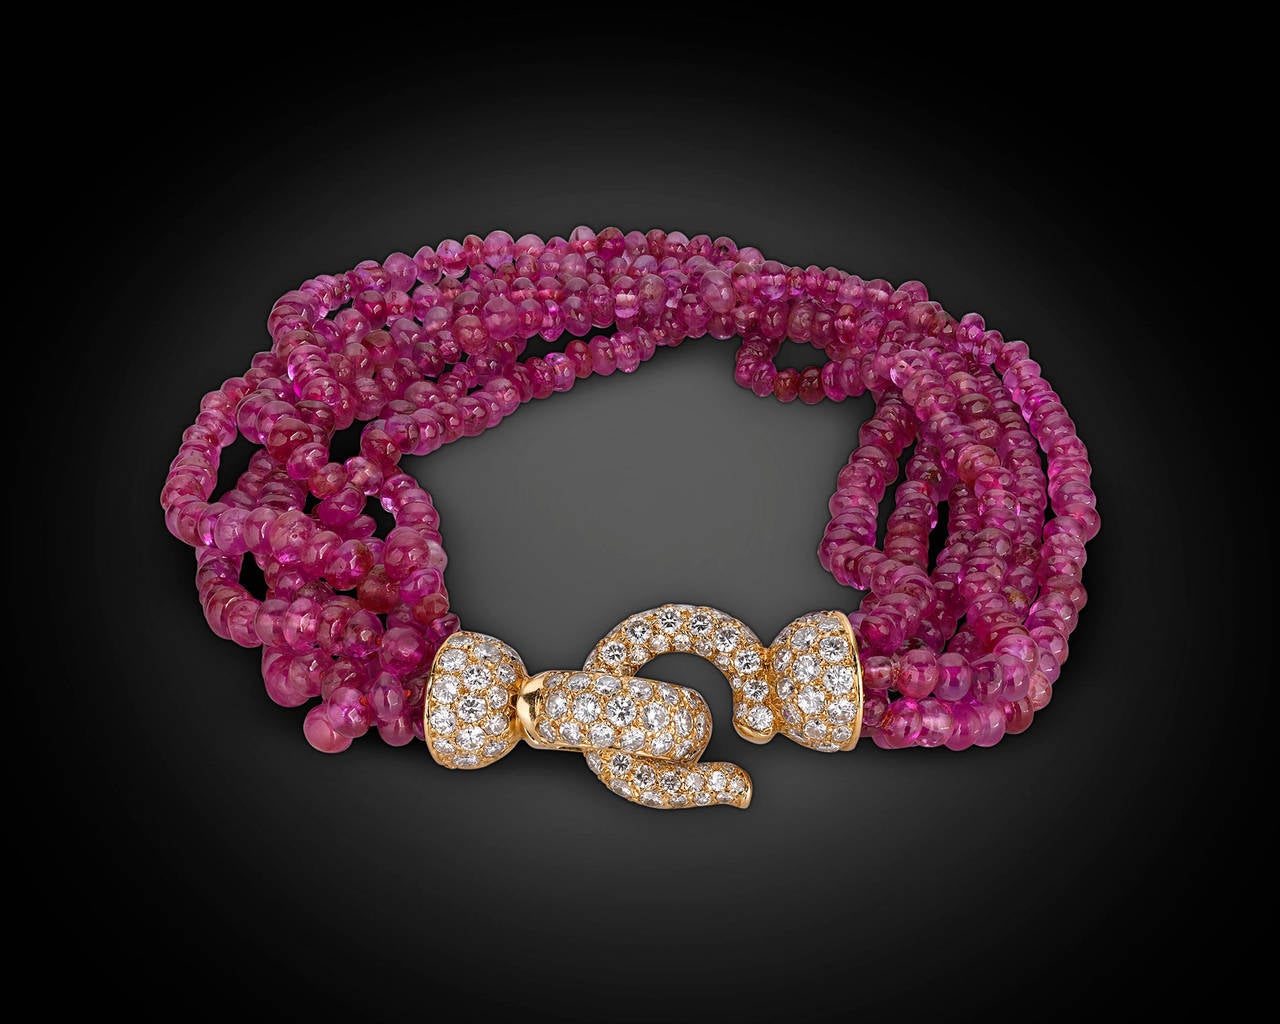 Six strands of wondrous red ruby beads take center stage in this exceptional Cartier bracelet. The 18K yellow gold hook clasp that secures this bracelet is enveloped in 2.50 carats of shimmering white diamonds. The legendary house of Cartier created